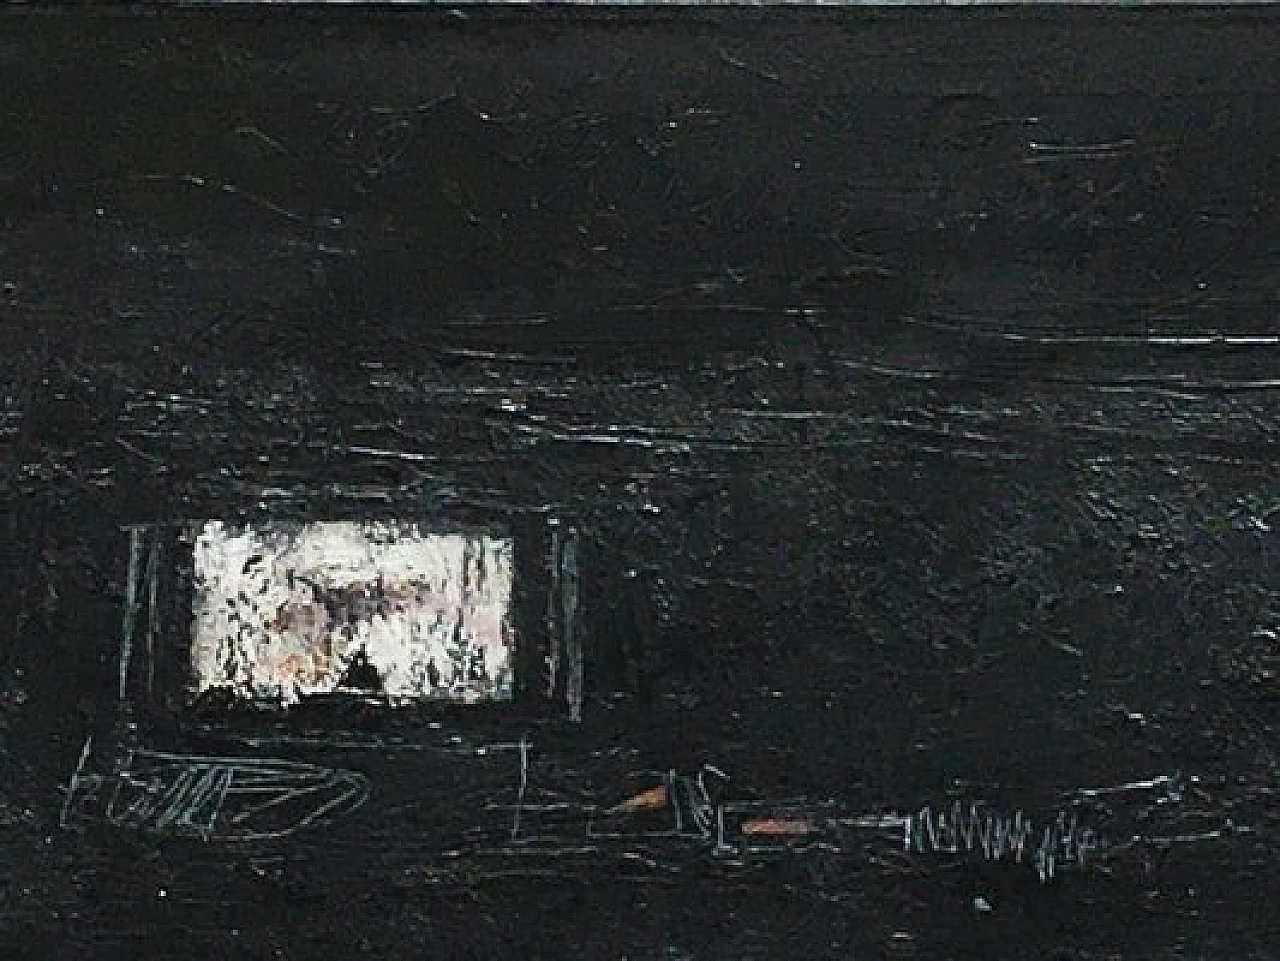 Massimo D'Orta, The Journey, mixed media painting on canvas, 2011 3